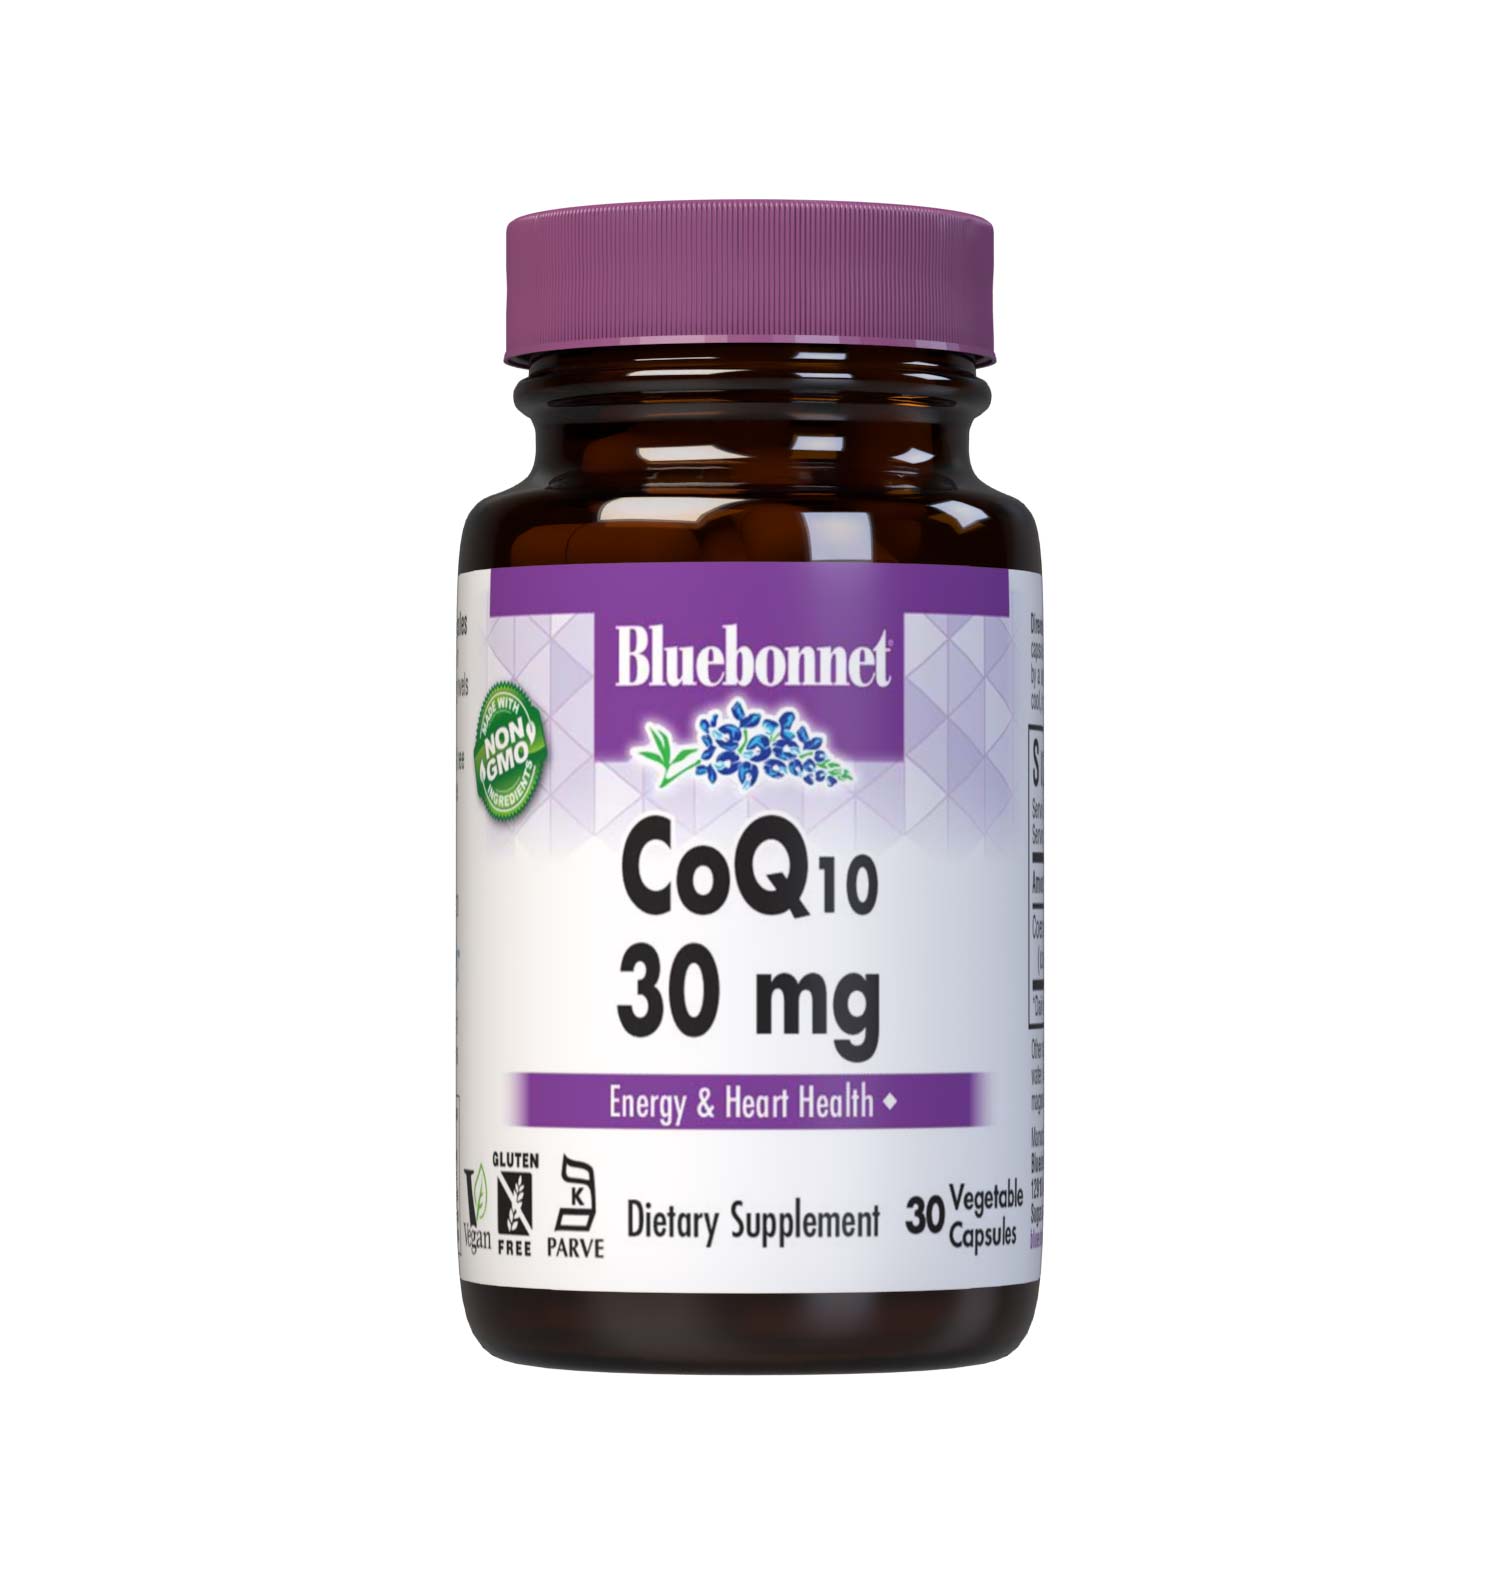 Bluebonnet’s CoQ10 30 mg 30 Vegetable Capsules provide 100% “trans-isomer” coenzyme Q10. #size_30 count